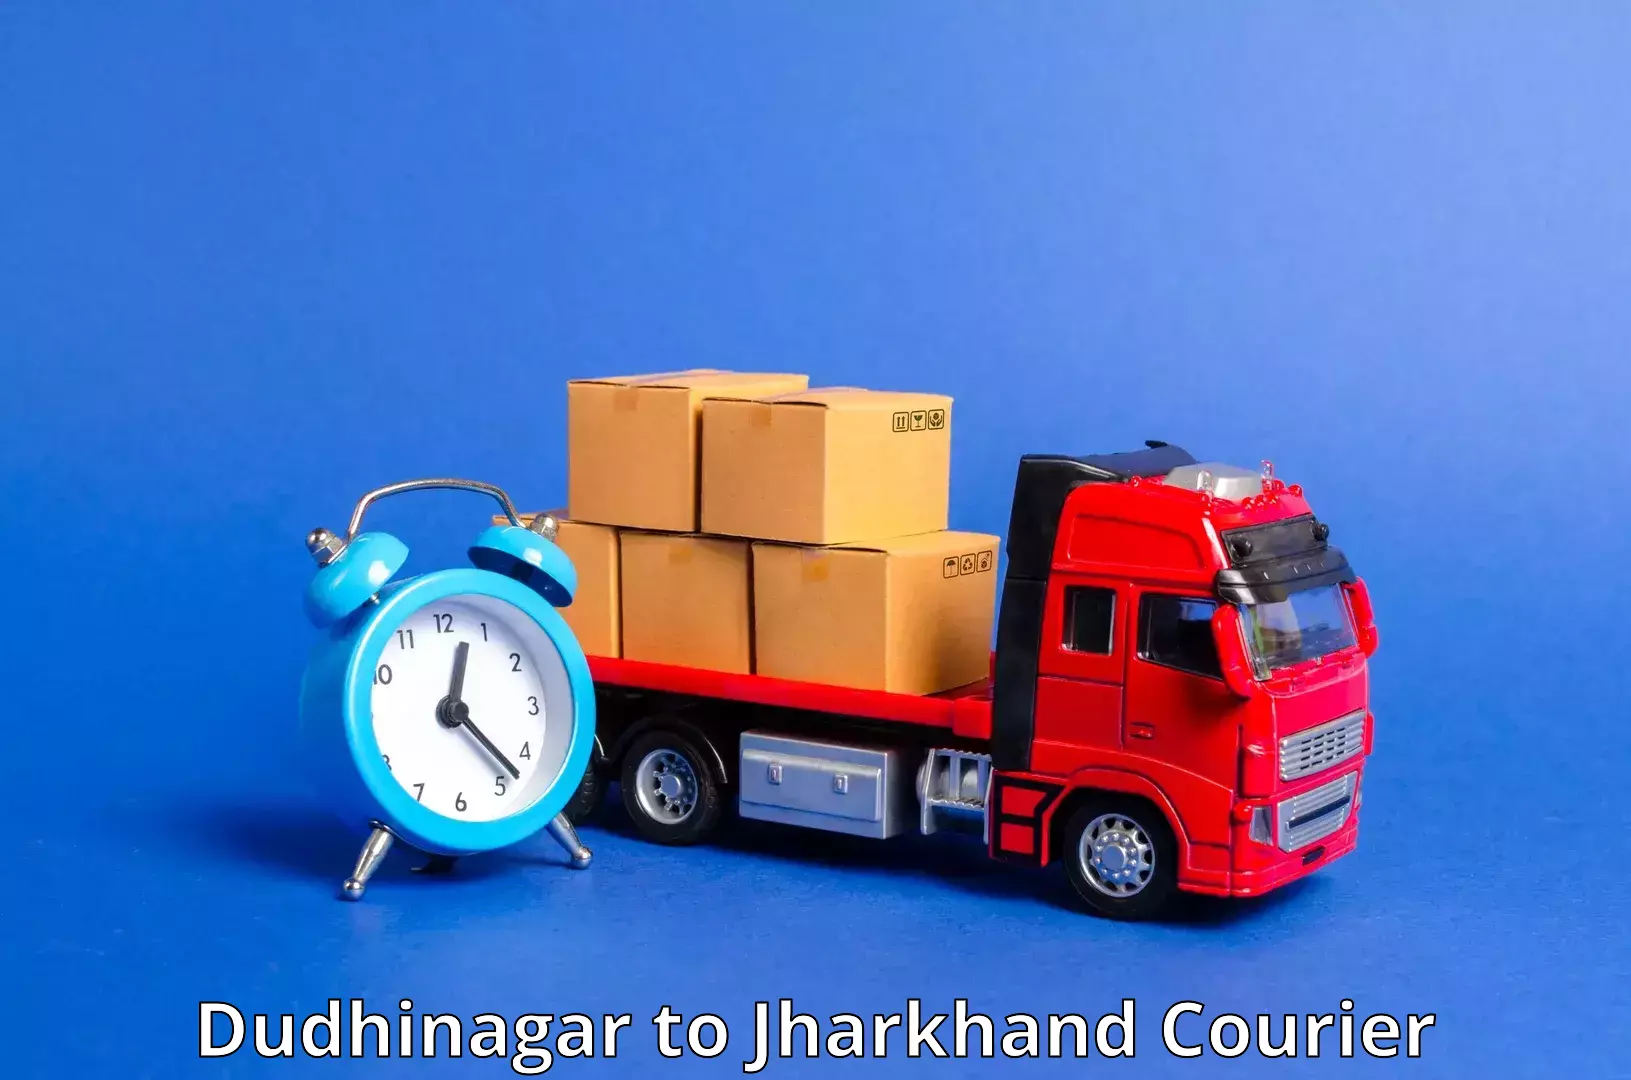 Subscription-based courier Dudhinagar to Poreyahat